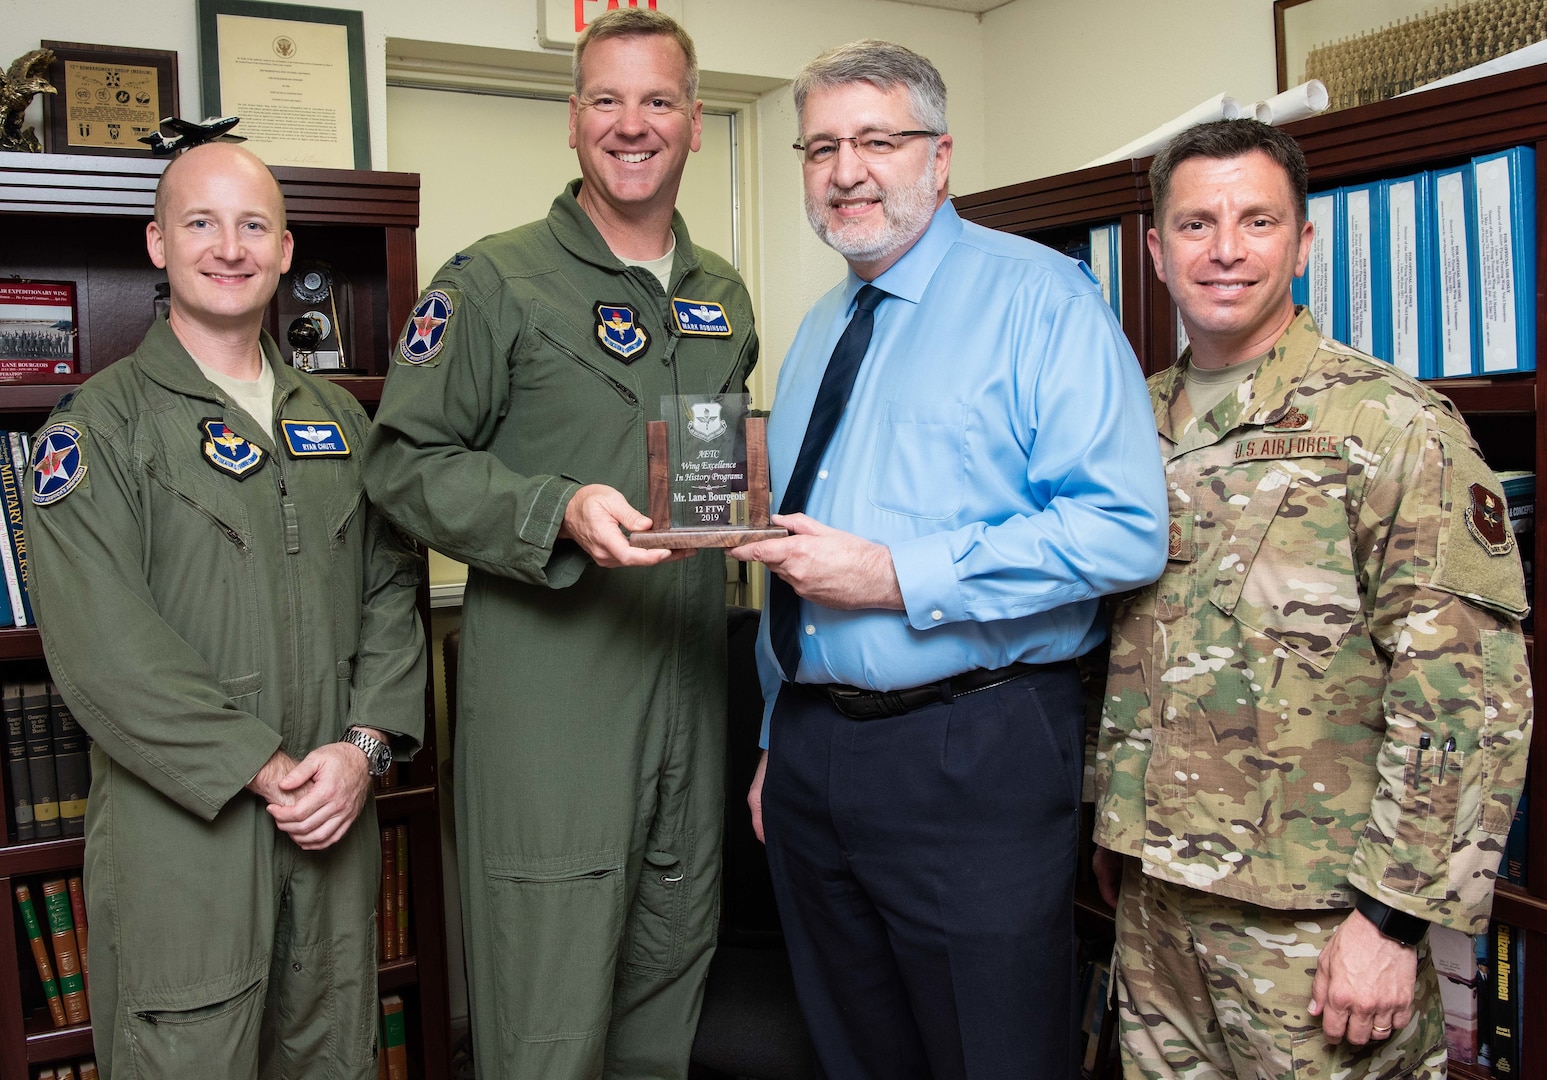 (From left) Col. Mark Robinson, 12th Flying Training Wing commander, Chief Master Sgt. Antonio Goldstrom, 12th FTW command chief, and Lt. Col. Ryan Chute, 12th FTW director of staff, present Lane Bourgeois, 12th FTW historian, with the 2019 Wing Excellence in History Programs award from Air Education and Training Command at Joint Base San Antonio-Randolph June 12. Lane was recognized for his critical thinking presentations and for being the first wing to produce a historical study in the new format.